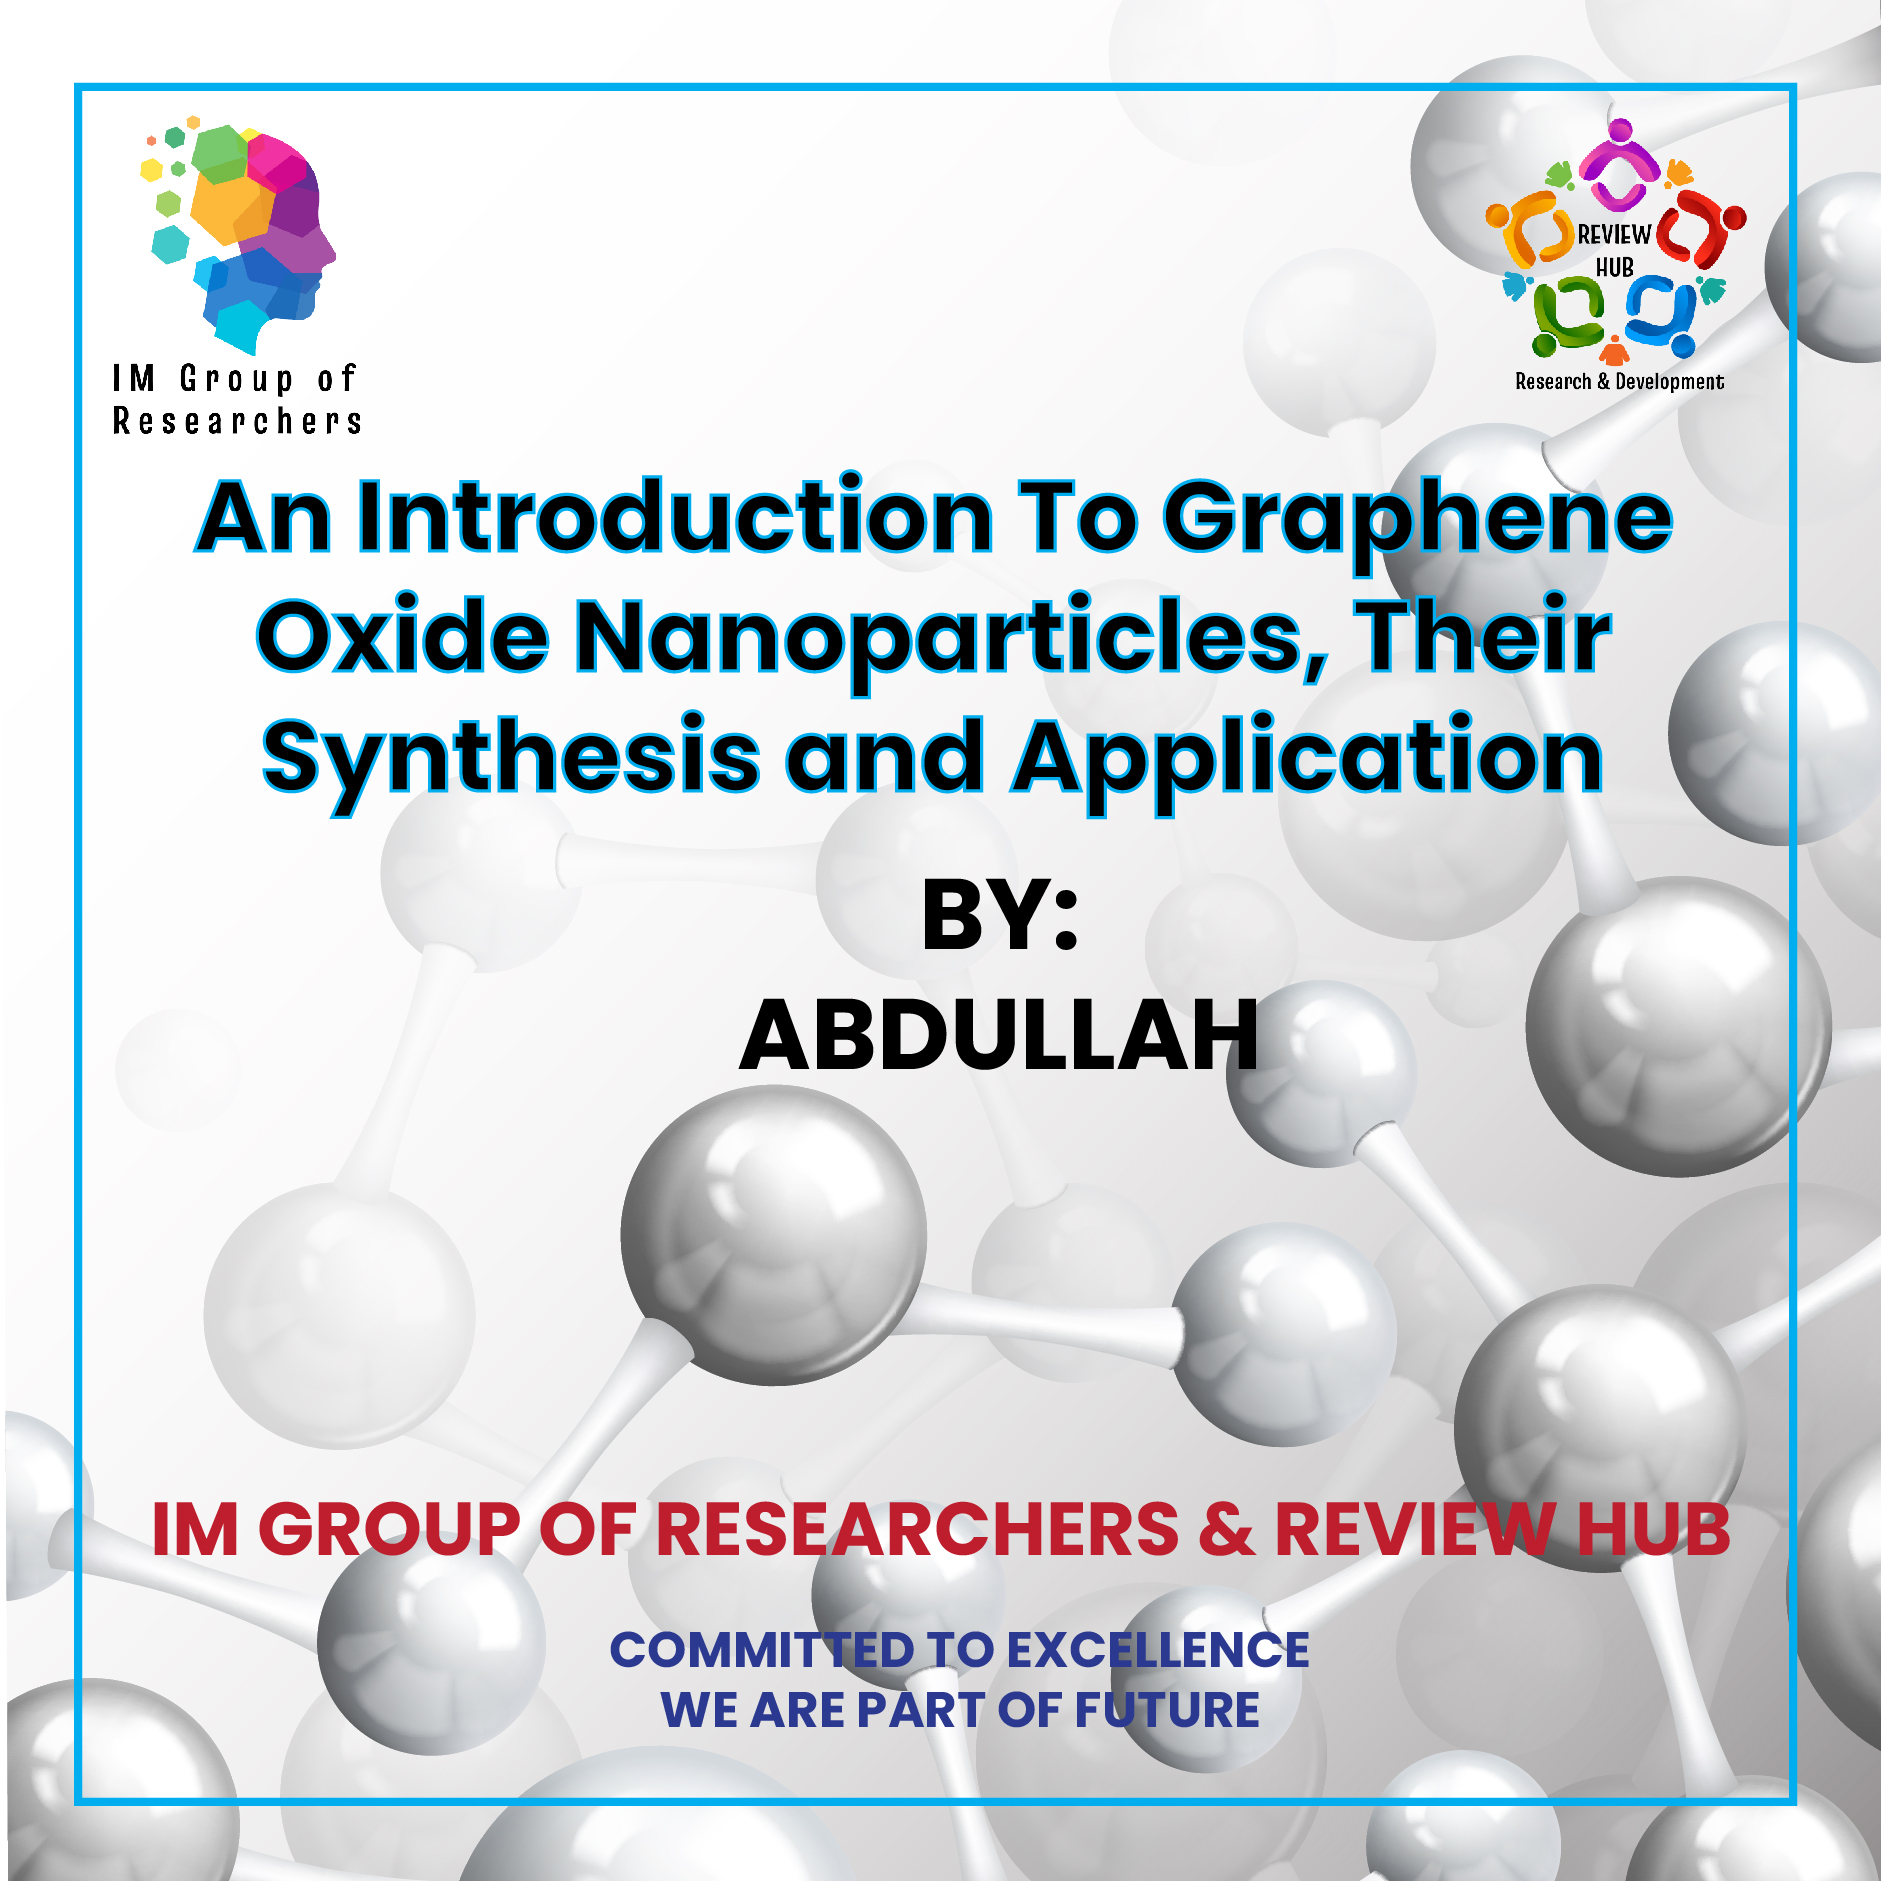 An Introduction to Graphene Oxide Nanoparticles, Their Synthesis and Application